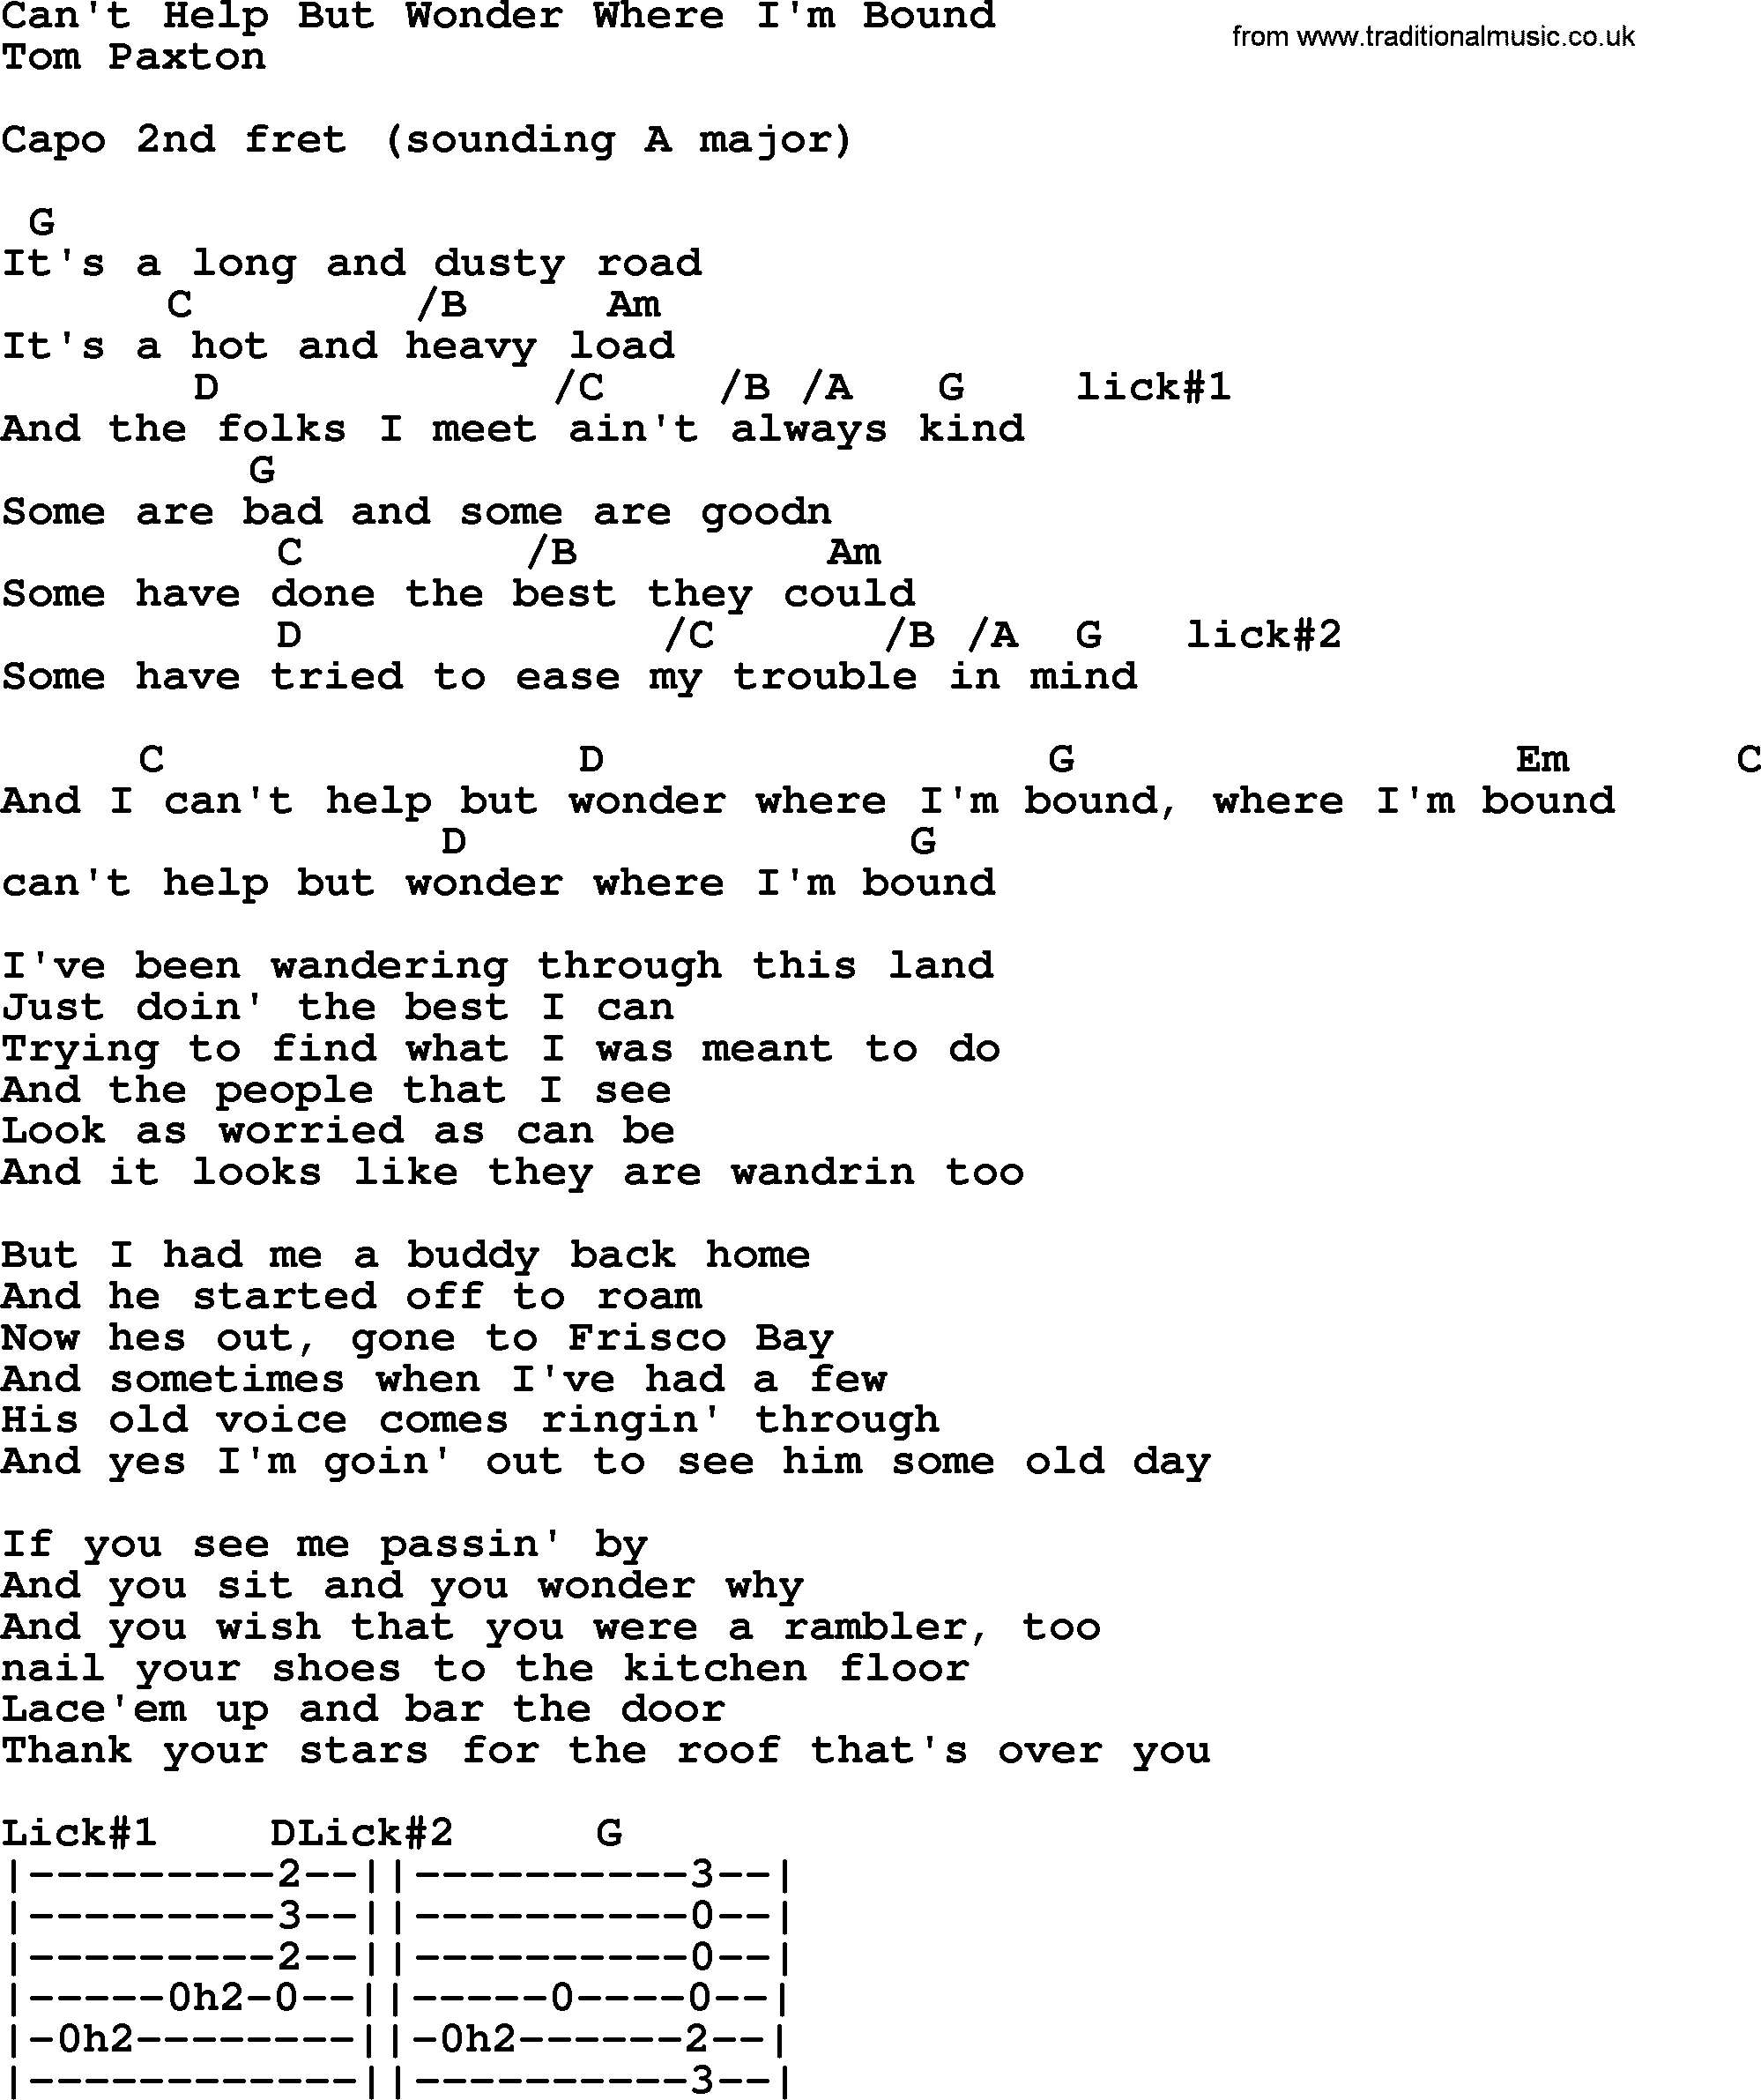 Tom Paxton song: Can't Help But Wonder Where I'm Bound, lyrics and chords